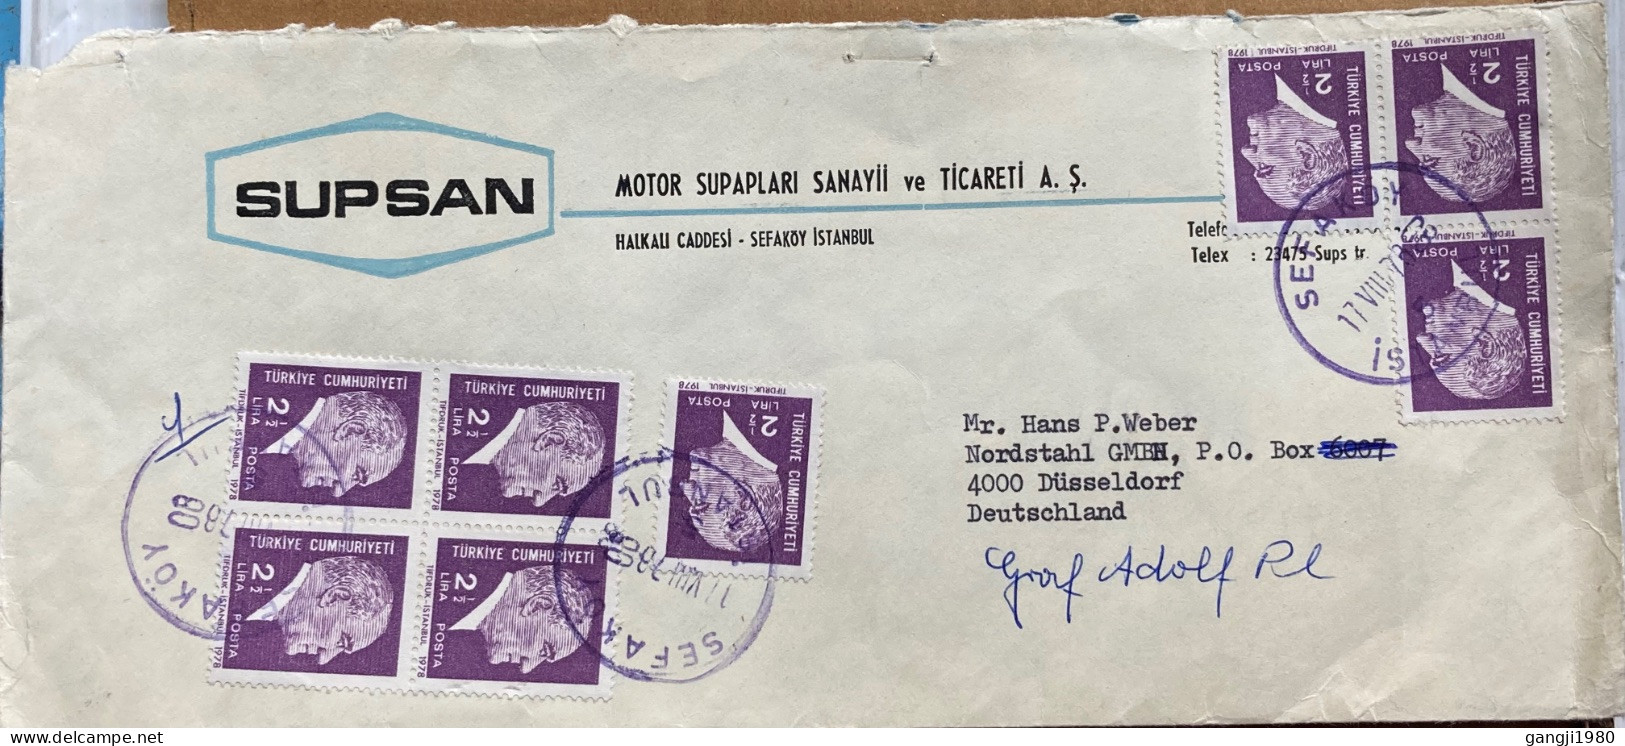 TURKEY TO GERMANY 1978, ADVERTISING COVER USED, RARE SHIPMENT NOTICE HAND STAMP BACKSIDE, SUPSAN MOTAR ENGINE VALVES IND - Covers & Documents